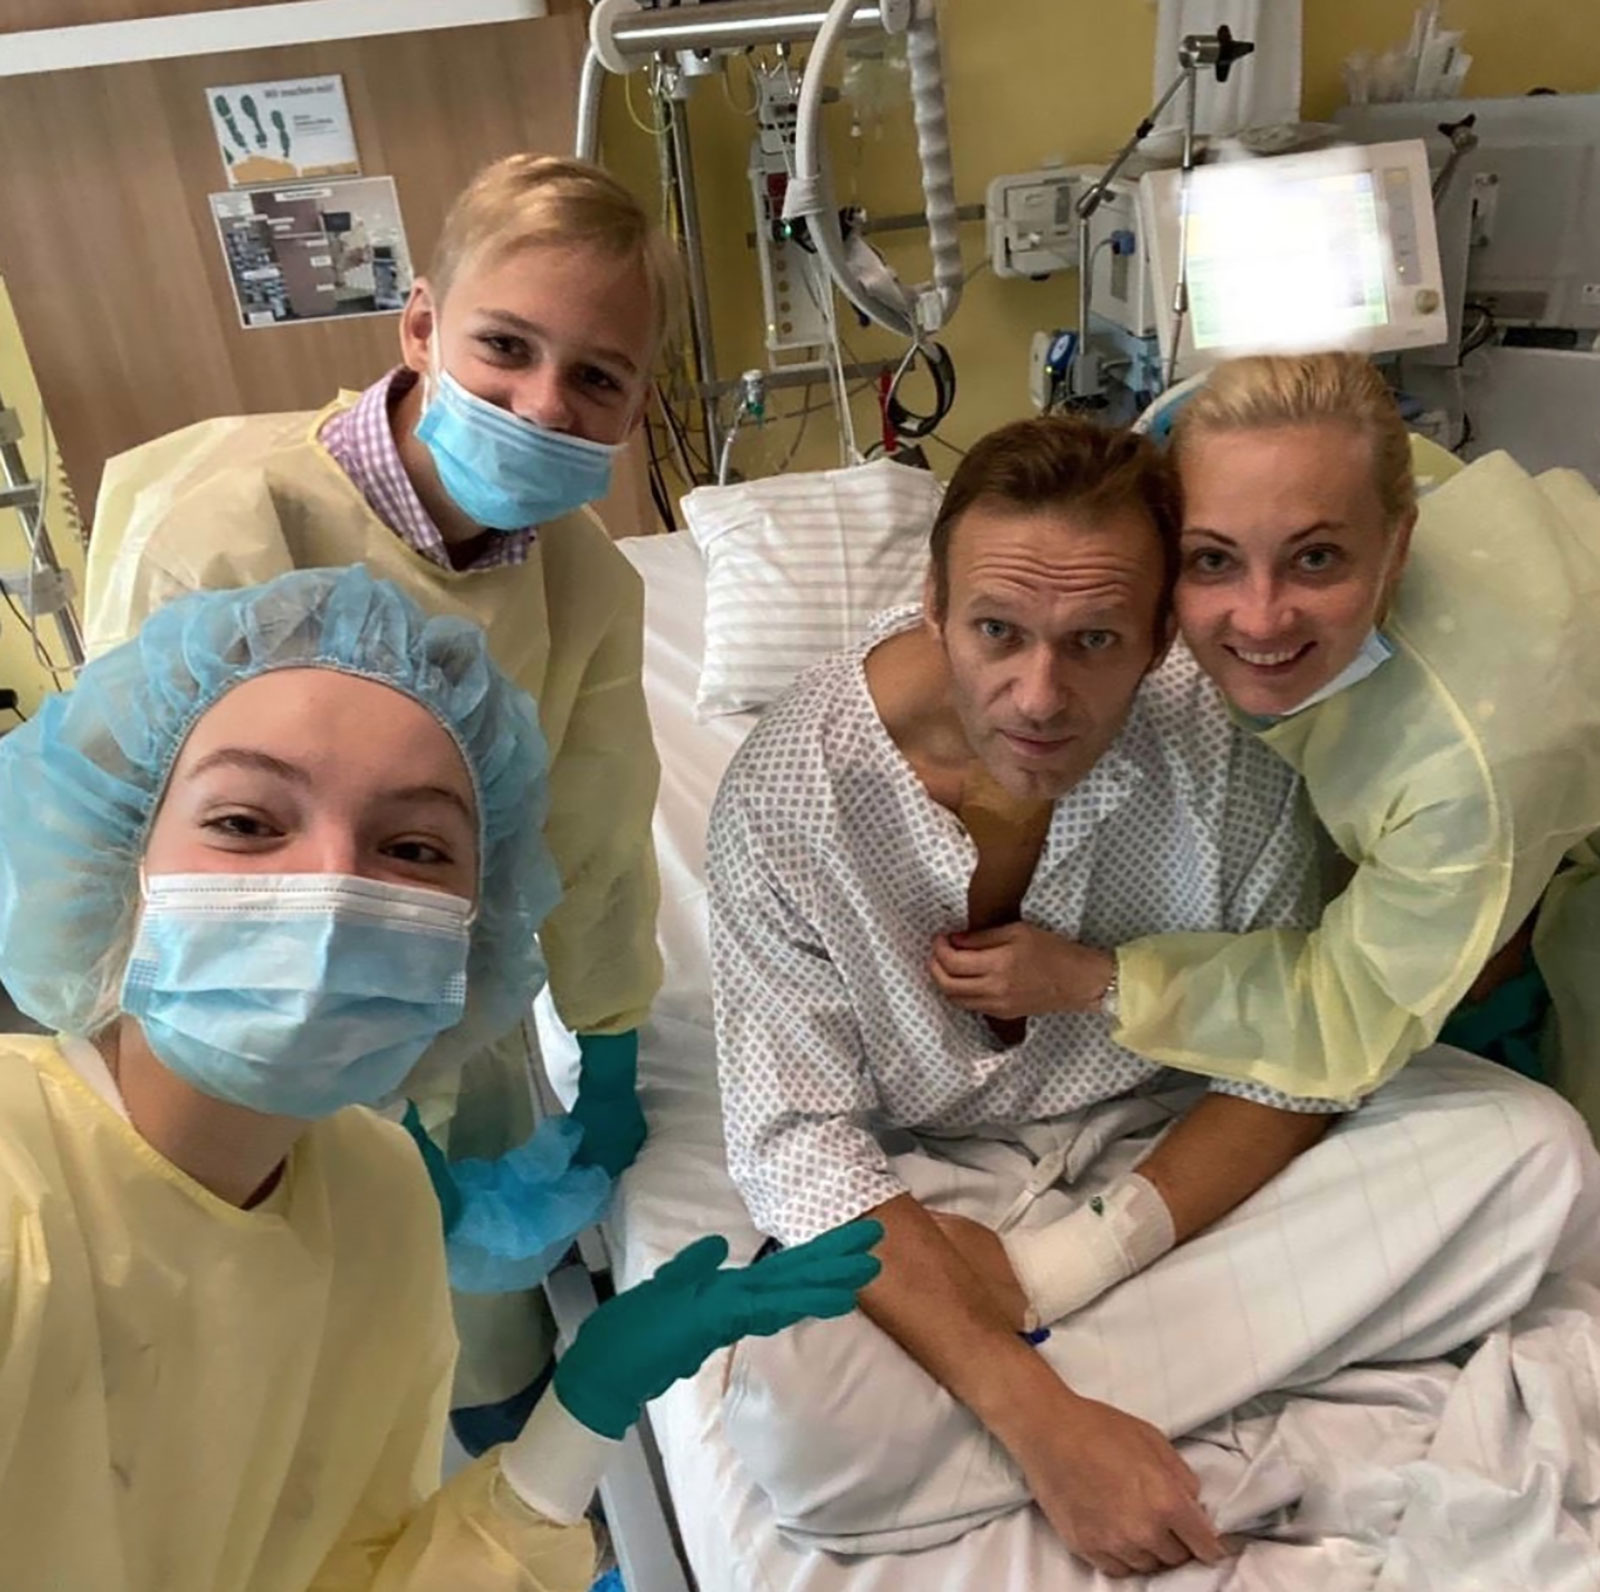 Navalny is surrounded by his wife, Yulia, and two children, Zakhar and Daria, while on a hospital bed in Berlin in September 2020. On social media, he said he was breathing on his own without medical support.